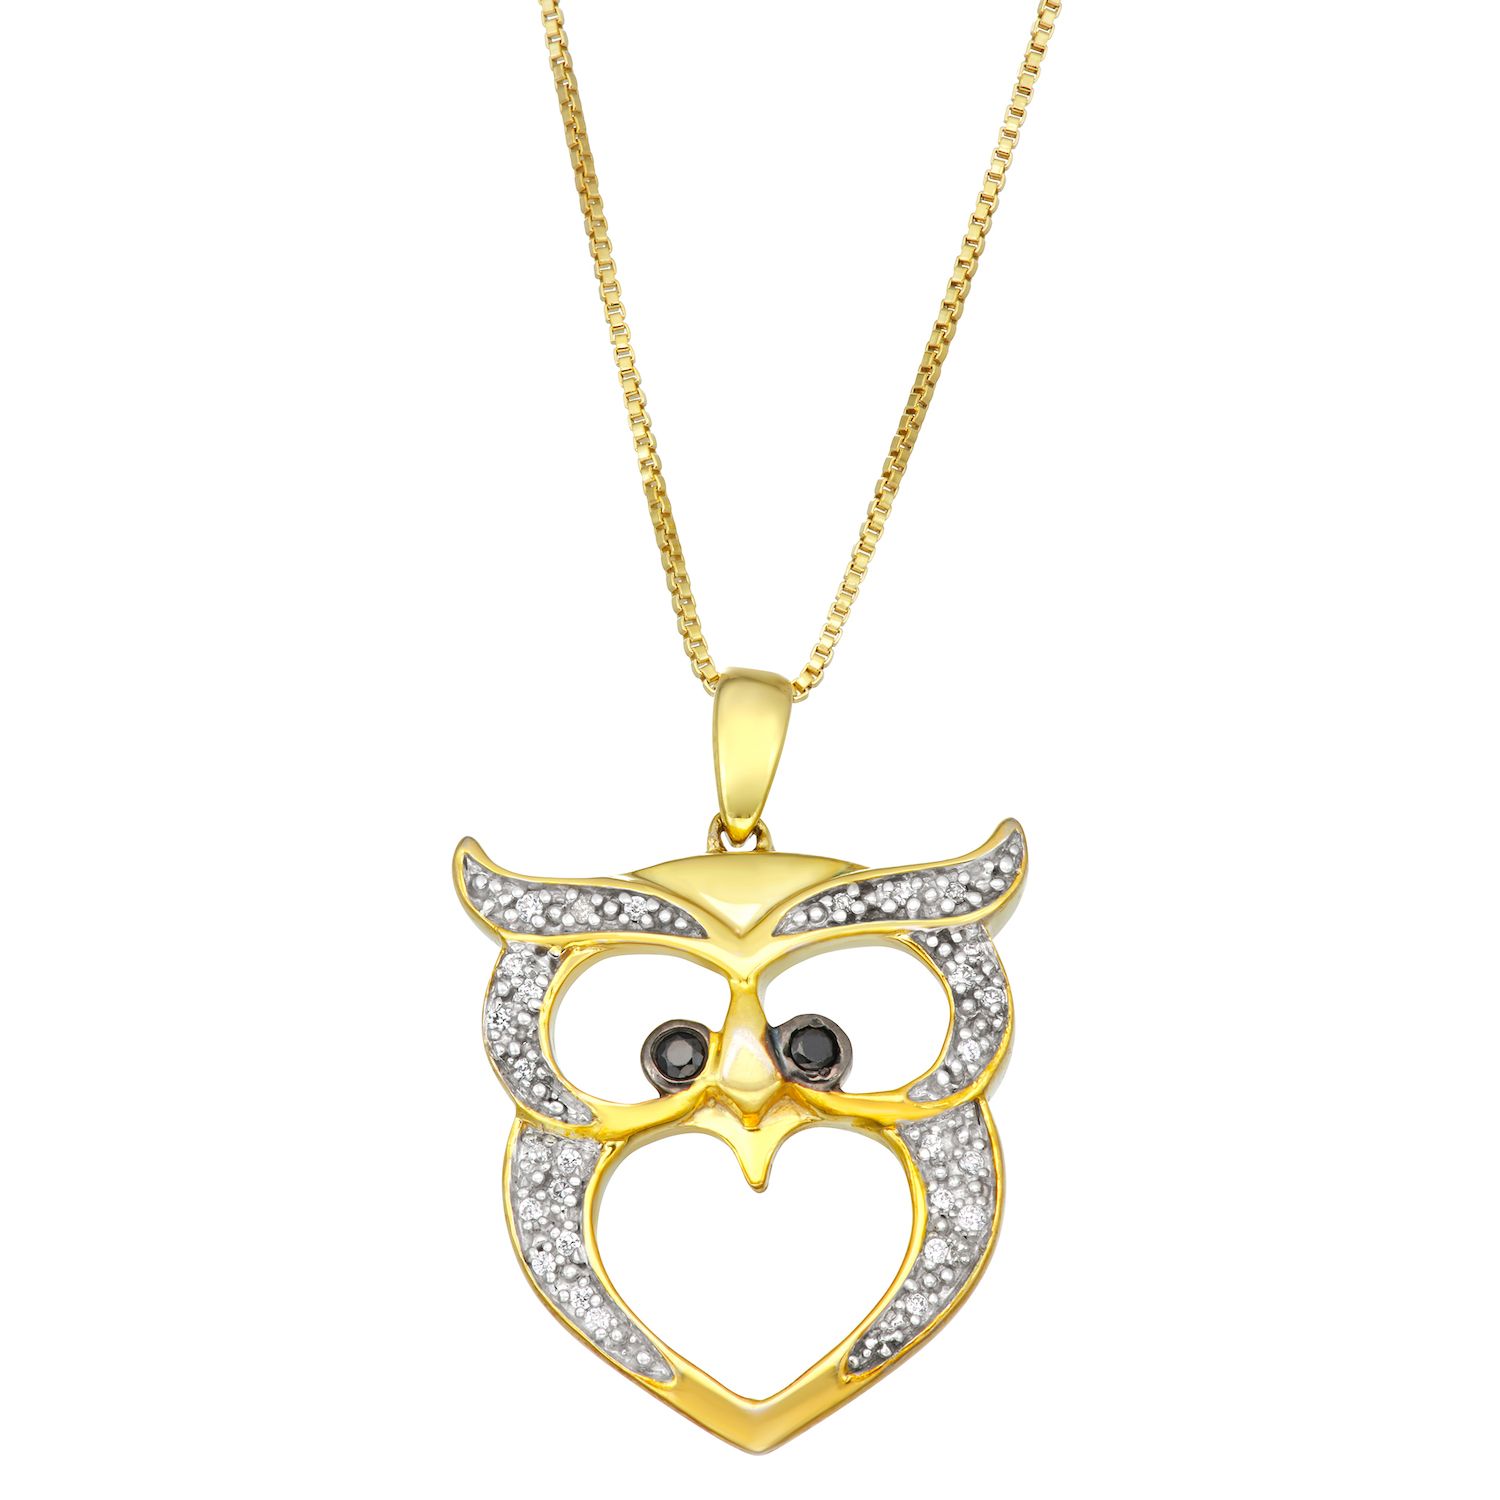 Image for HDI Sterling Silver 1/10 Carat T.W. Black & White Diamond Owl Necklace at Kohl's.